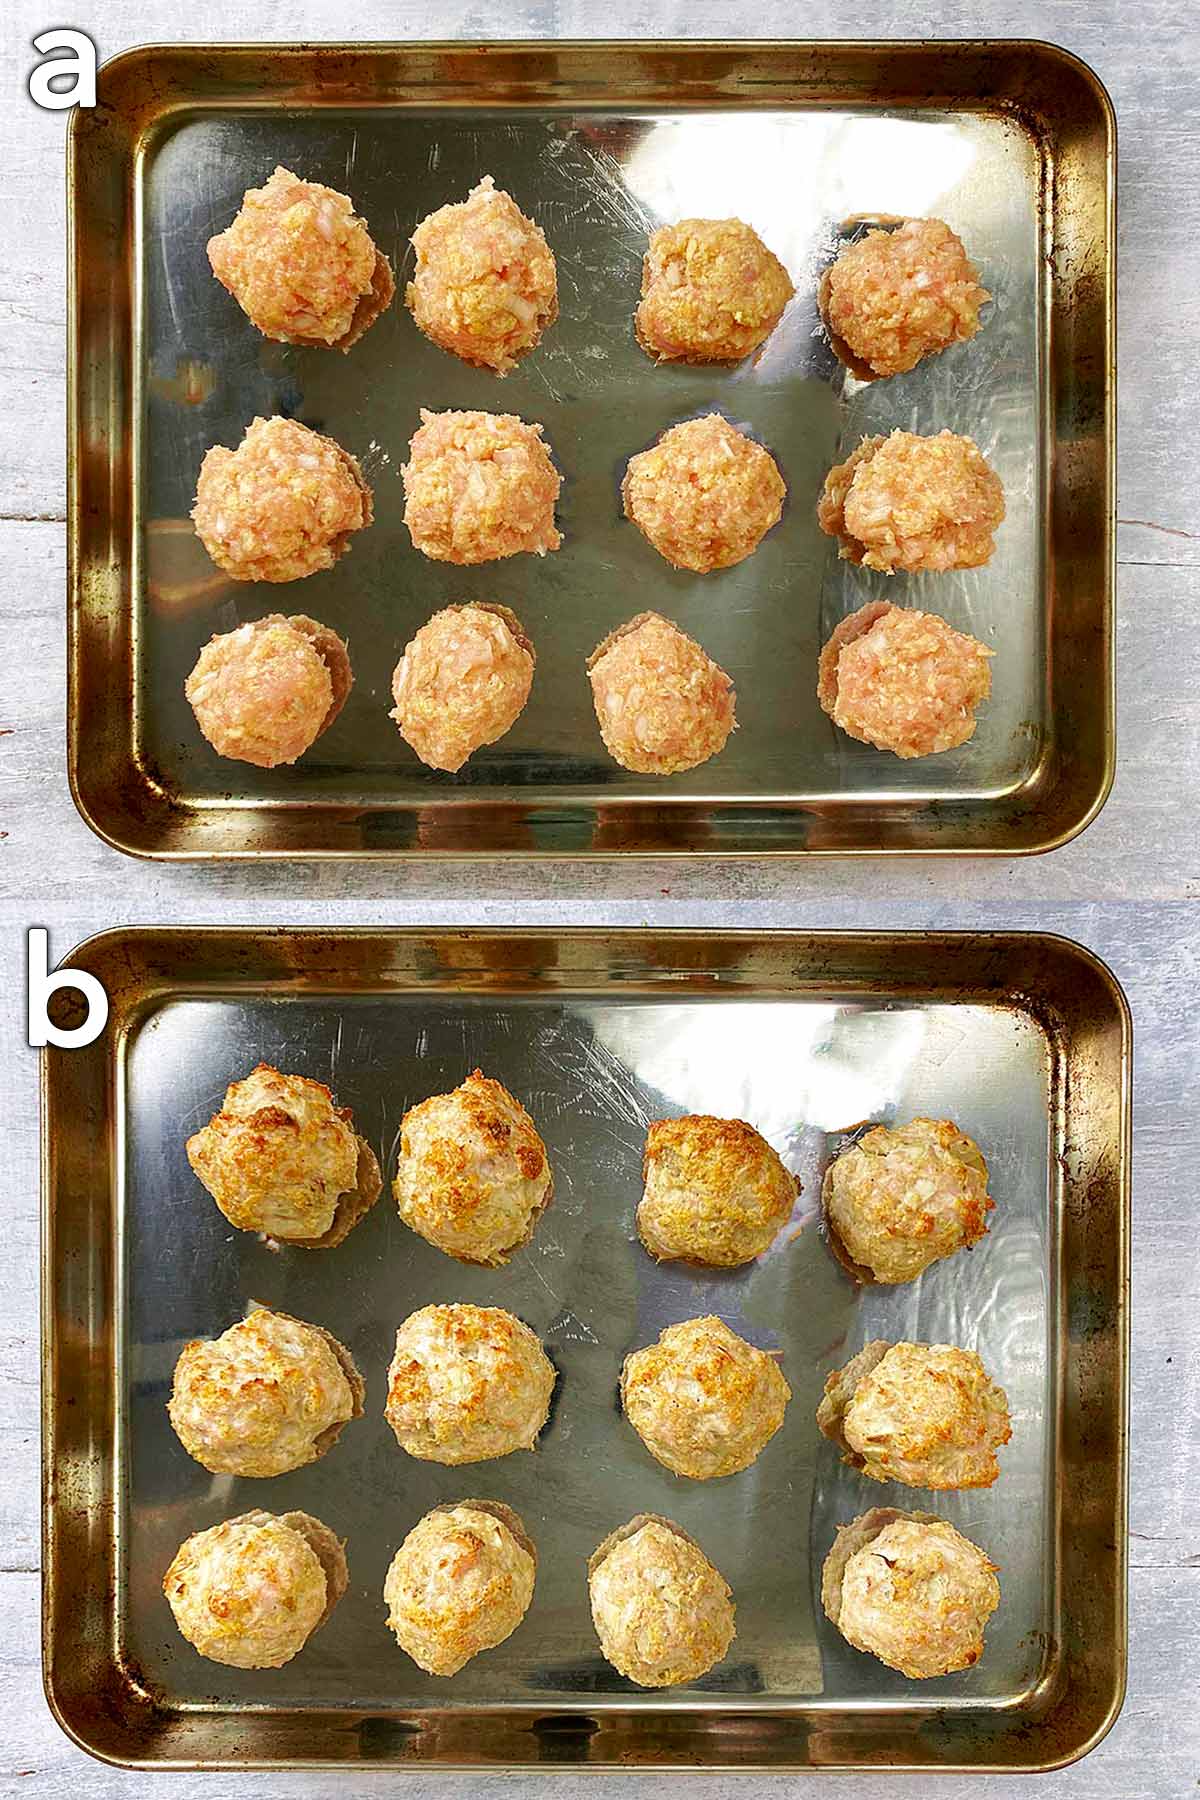 Two shot collage of meatballs on a baking tray, before and after cooking.